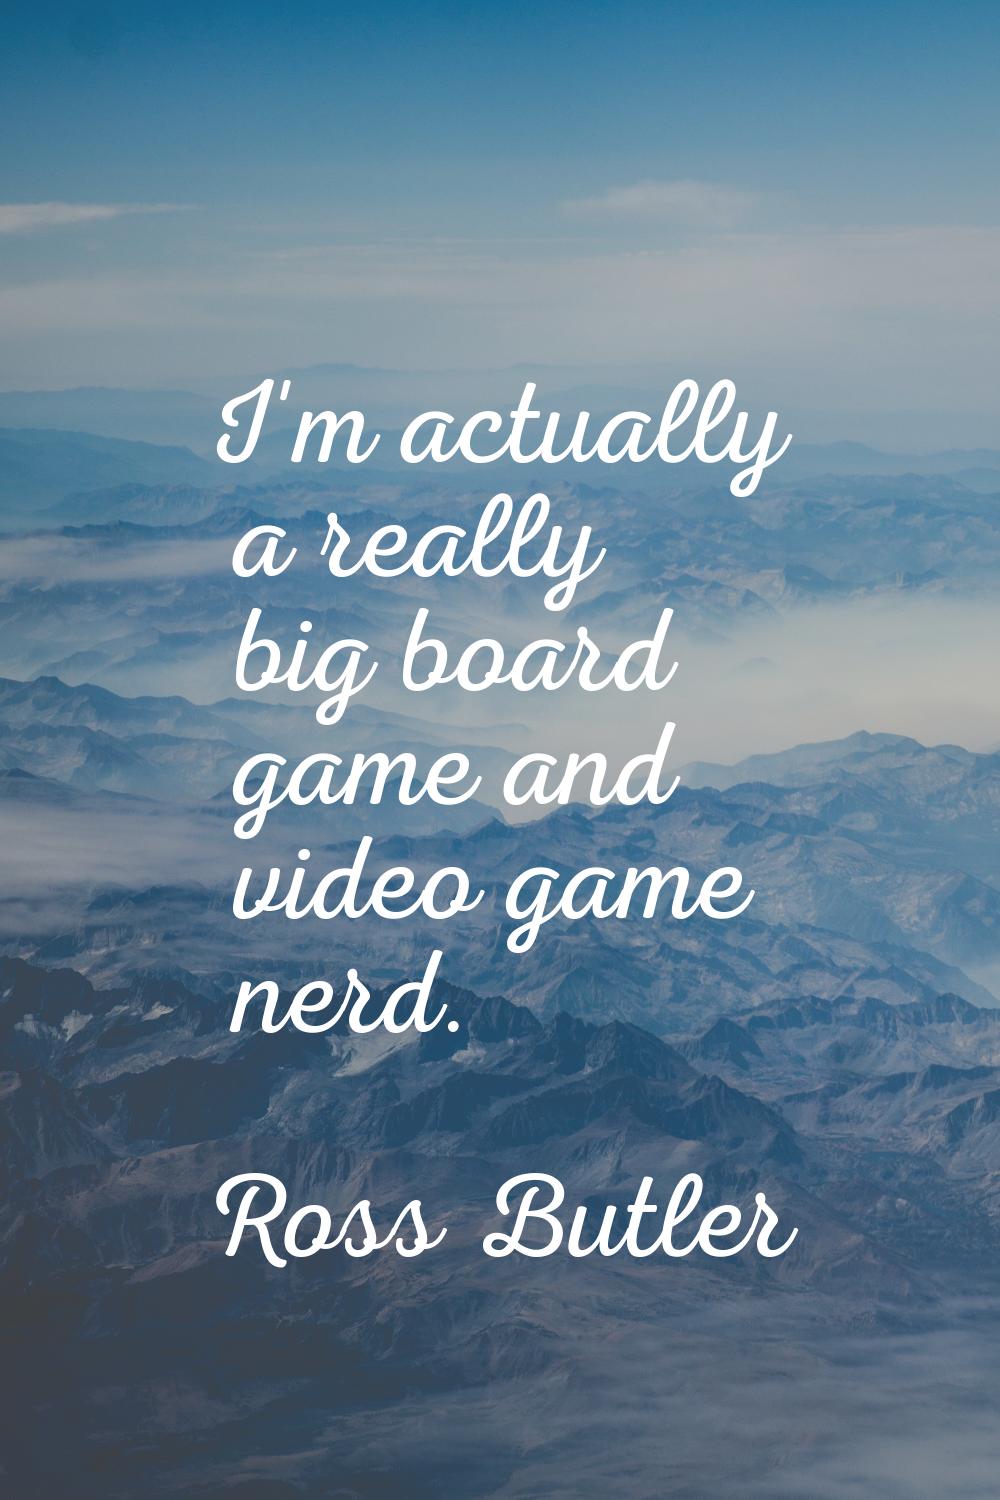 I'm actually a really big board game and video game nerd.